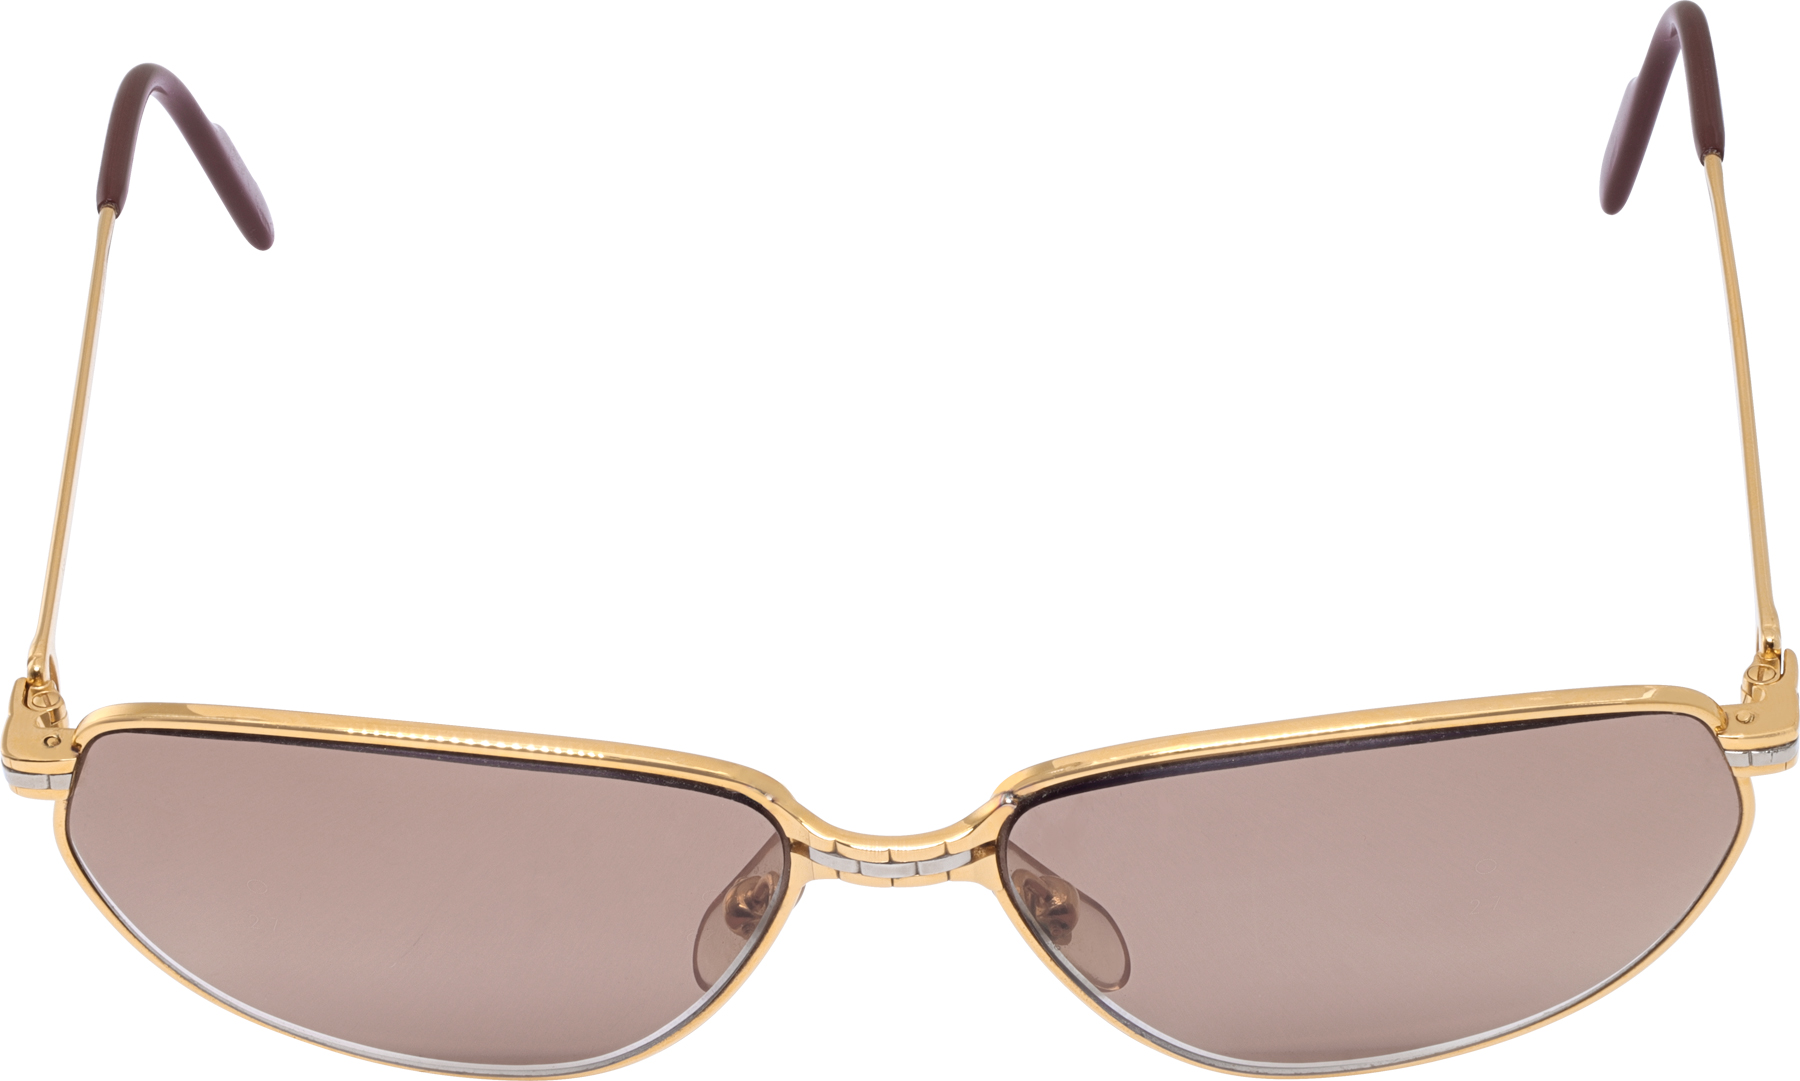 Cartier Maillon Panthere glasses in gold plate. lens 57mm, bridge 15, temple 135mm.